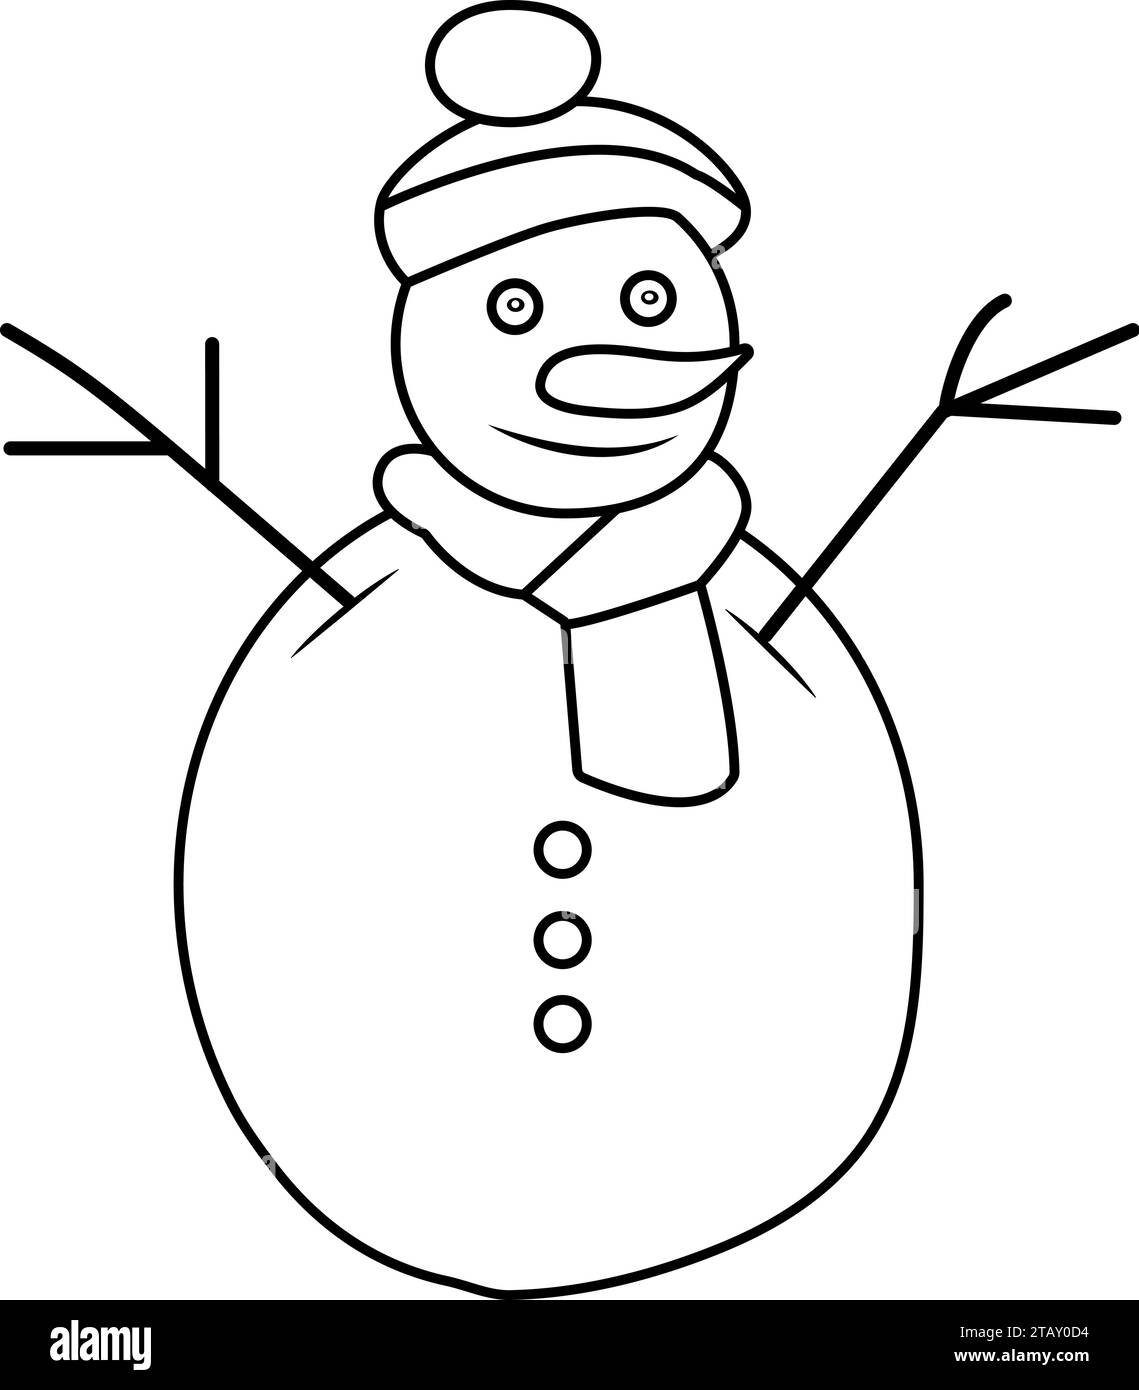 Magical Snowman Color By Number Coloring Book For Kids: Snowman